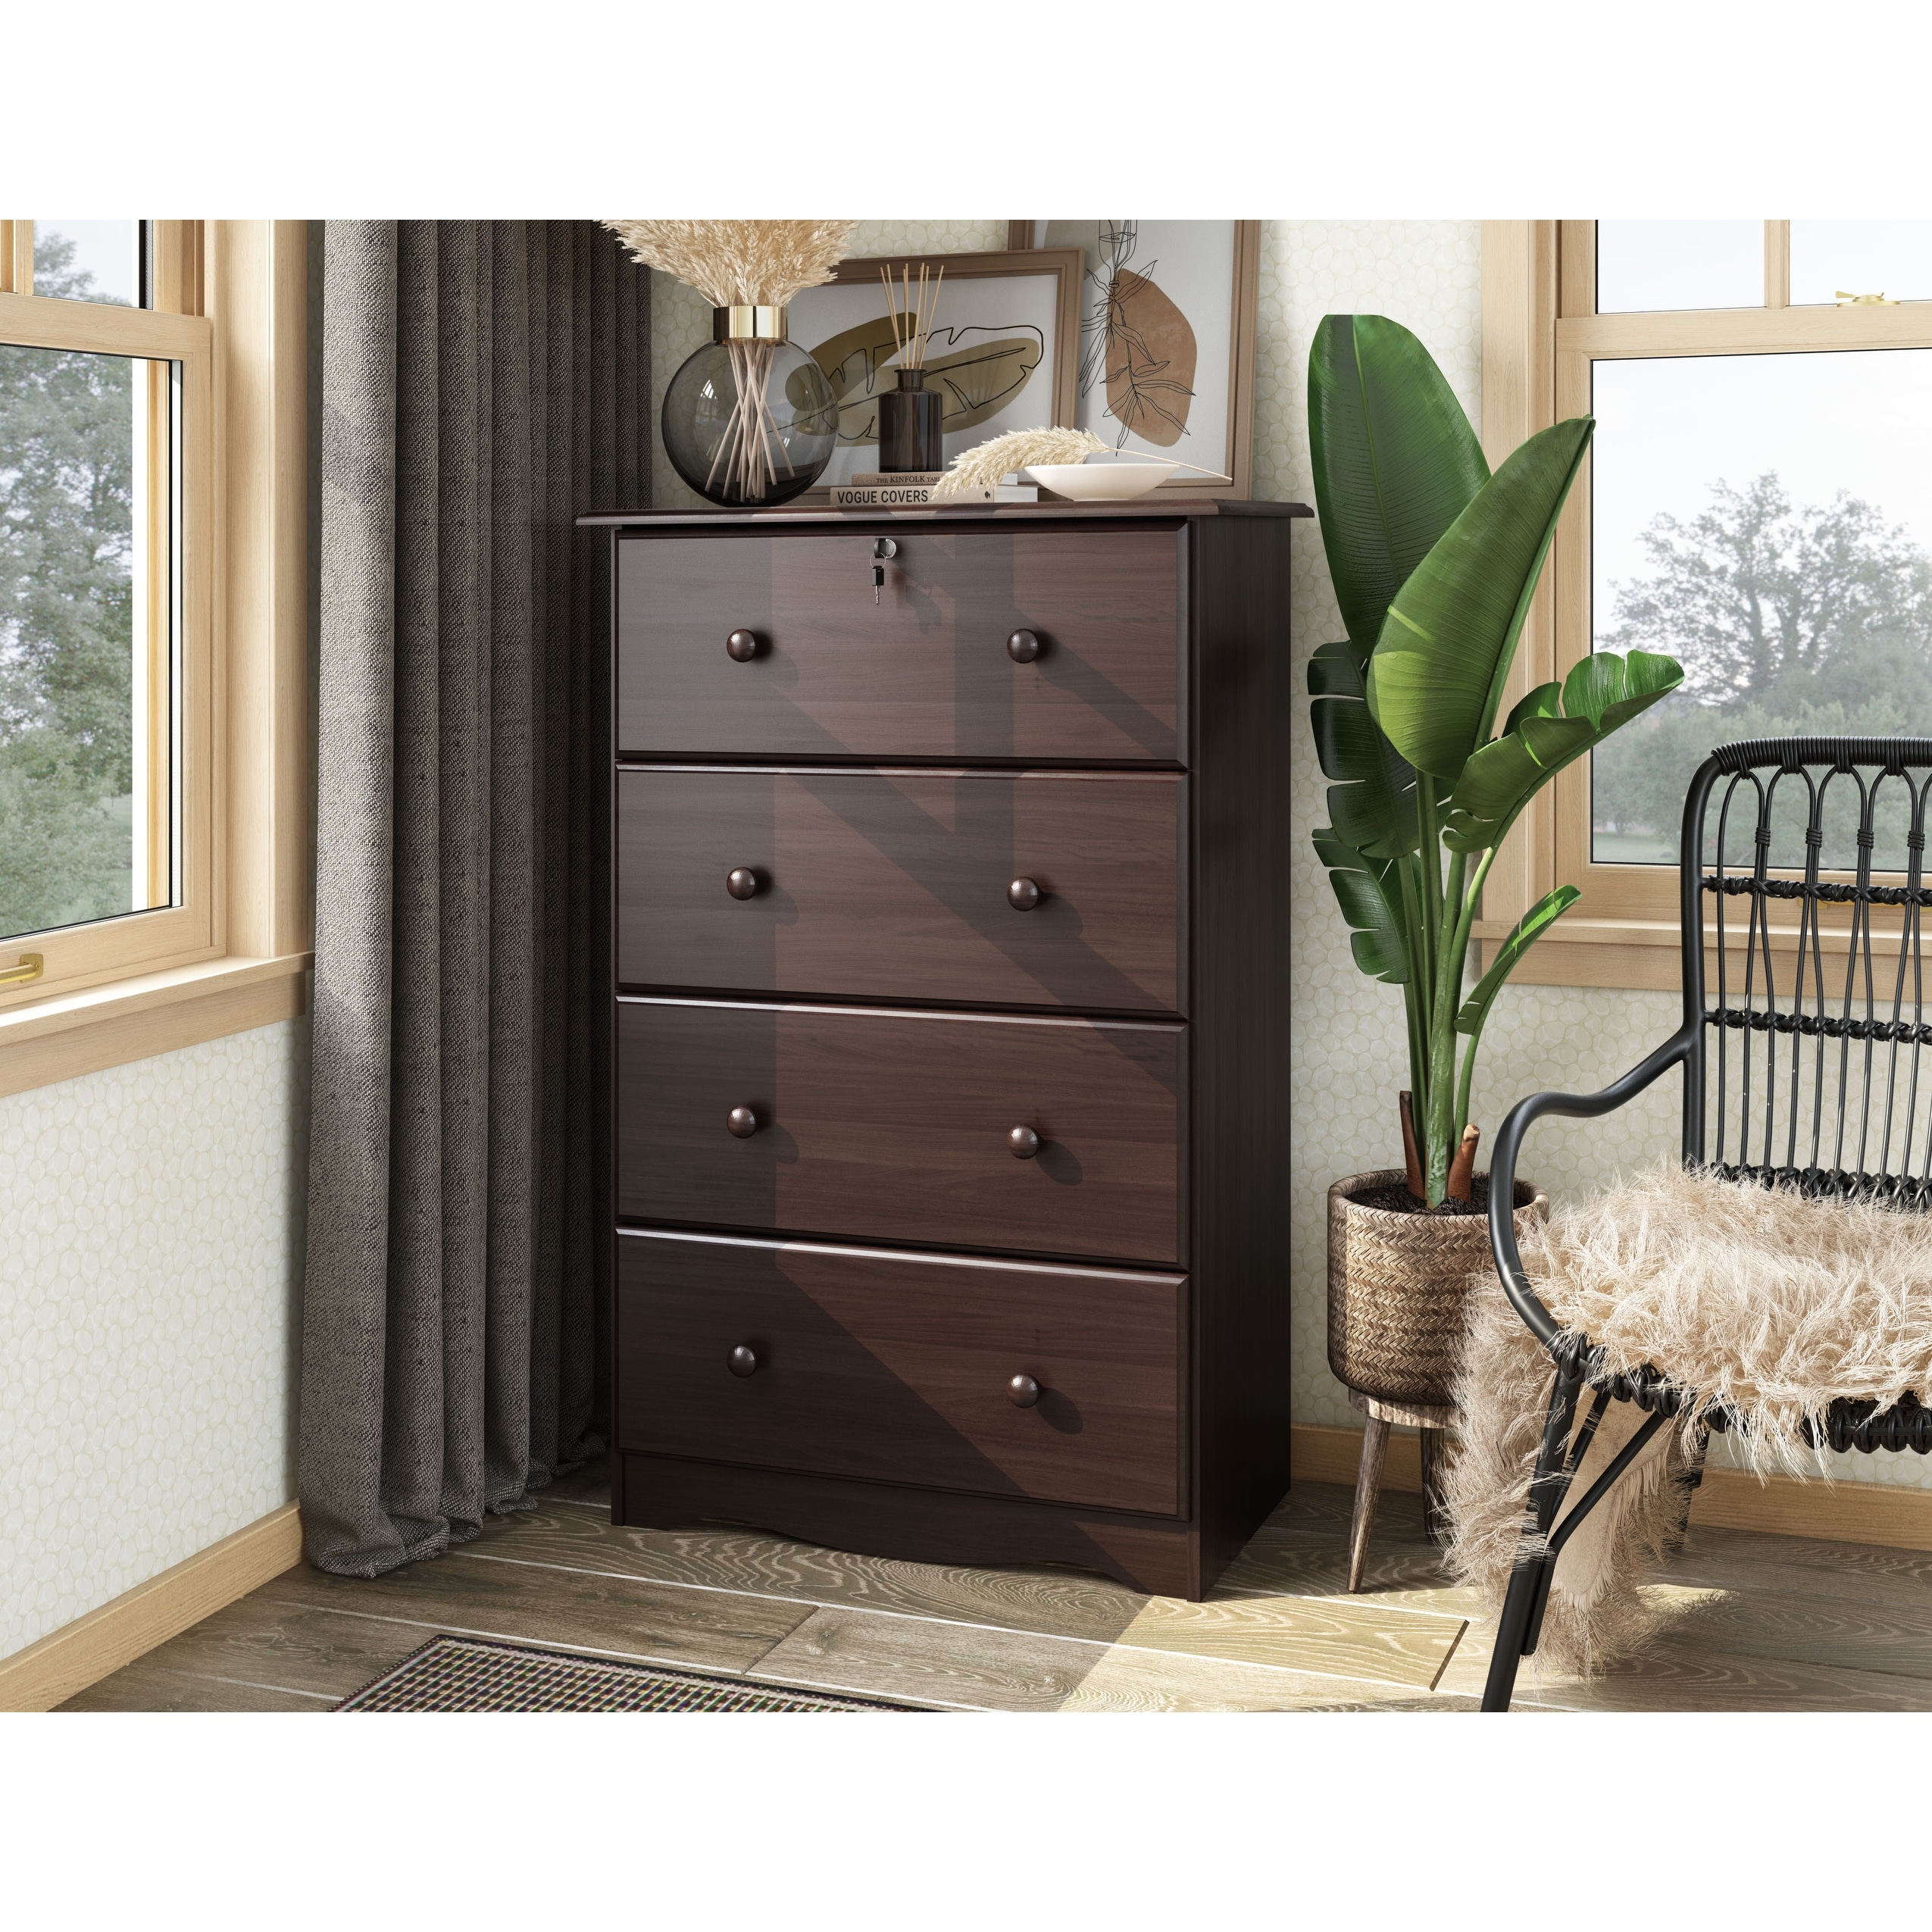 100% Solid Wood Double Dresser by Palace Imports-4 Super Jumbo/2 Regular Drawers 